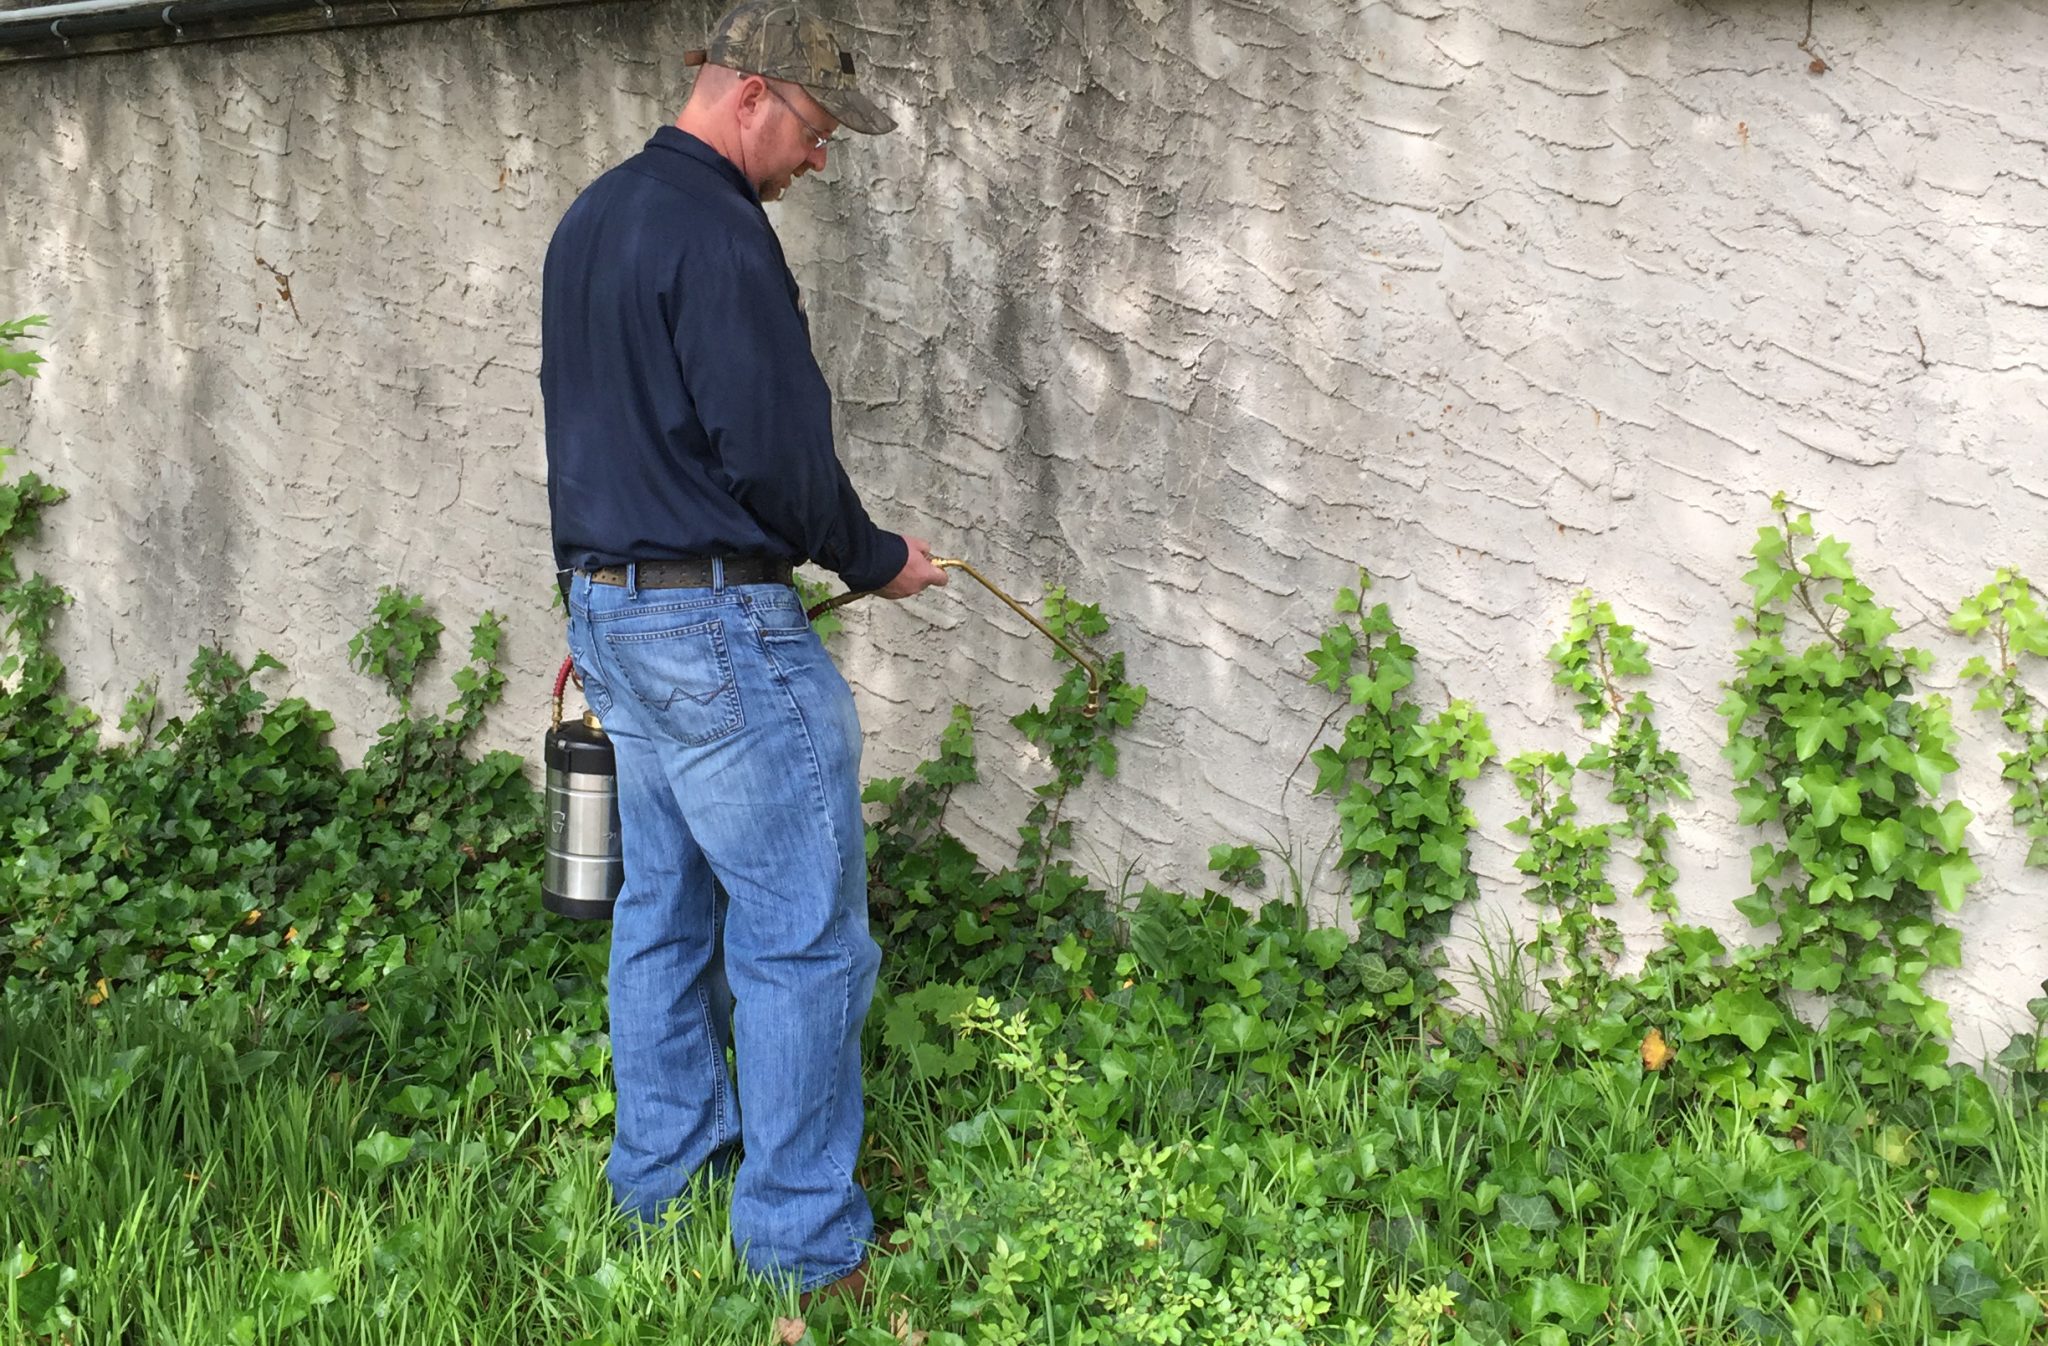 exterminator is spraying insecticides on yard